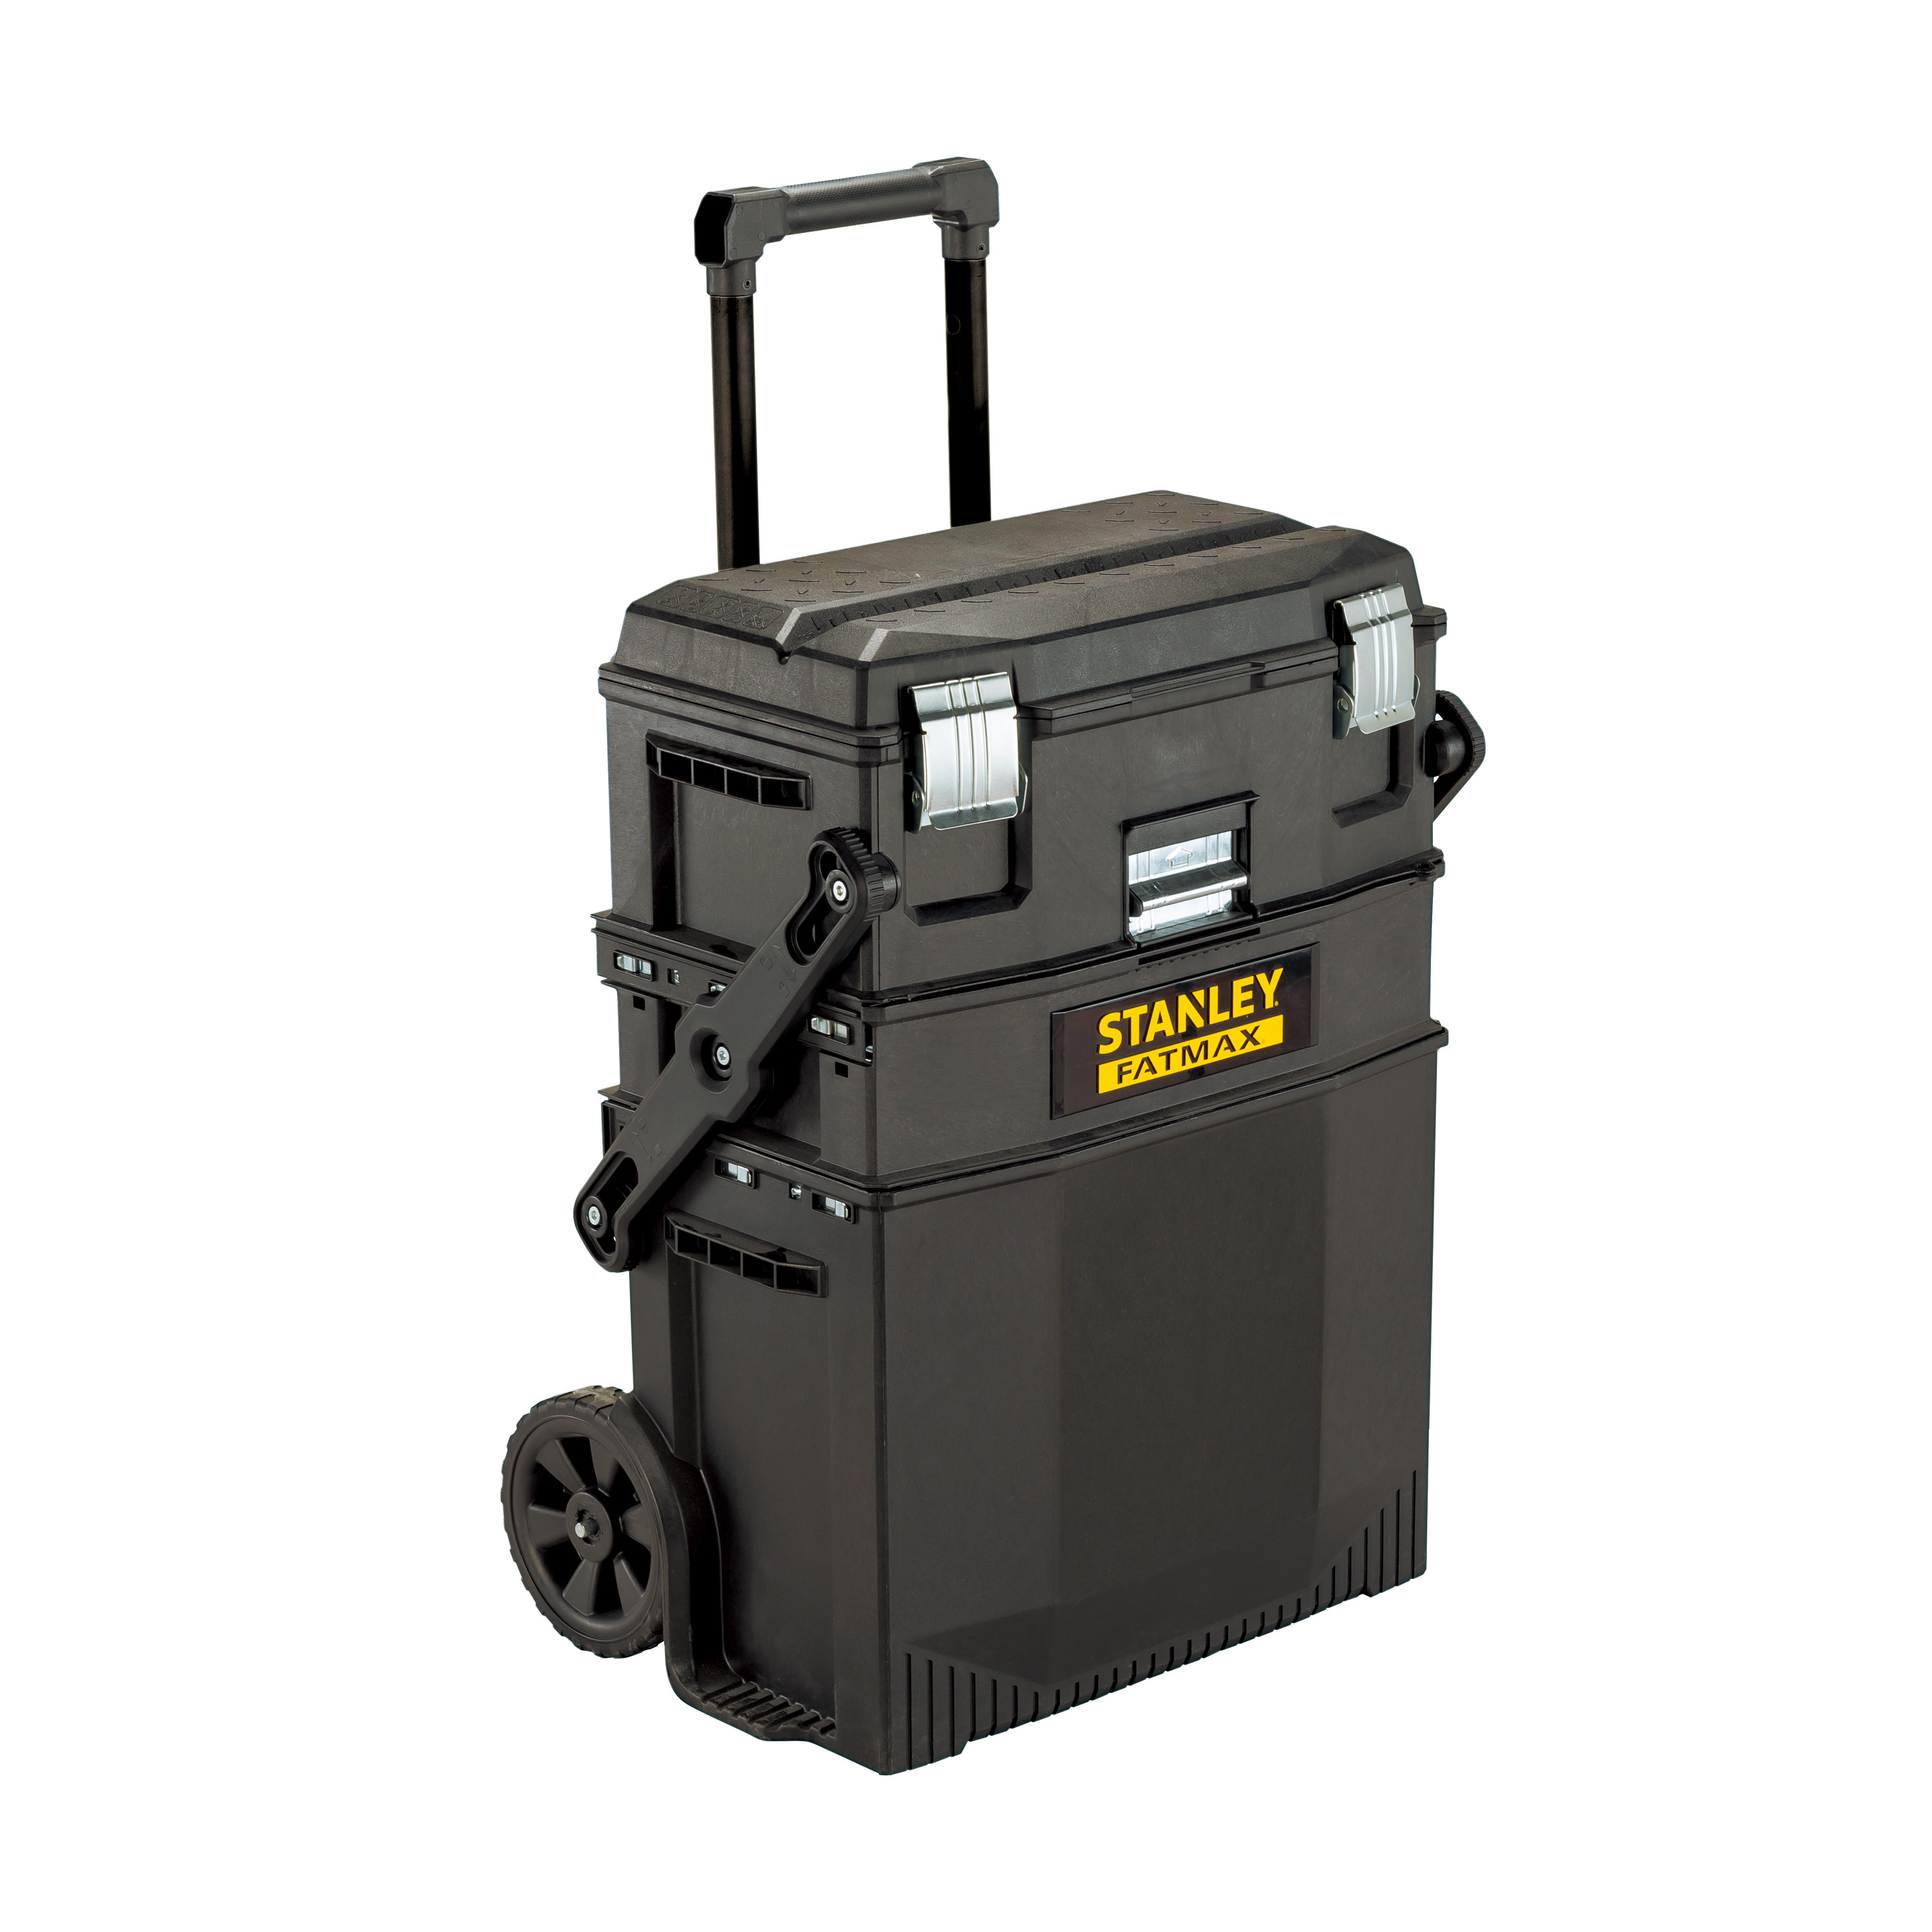 STANLEY FATMAX 020800R 4-in-1 Mobile Work Station - image 1 of 28